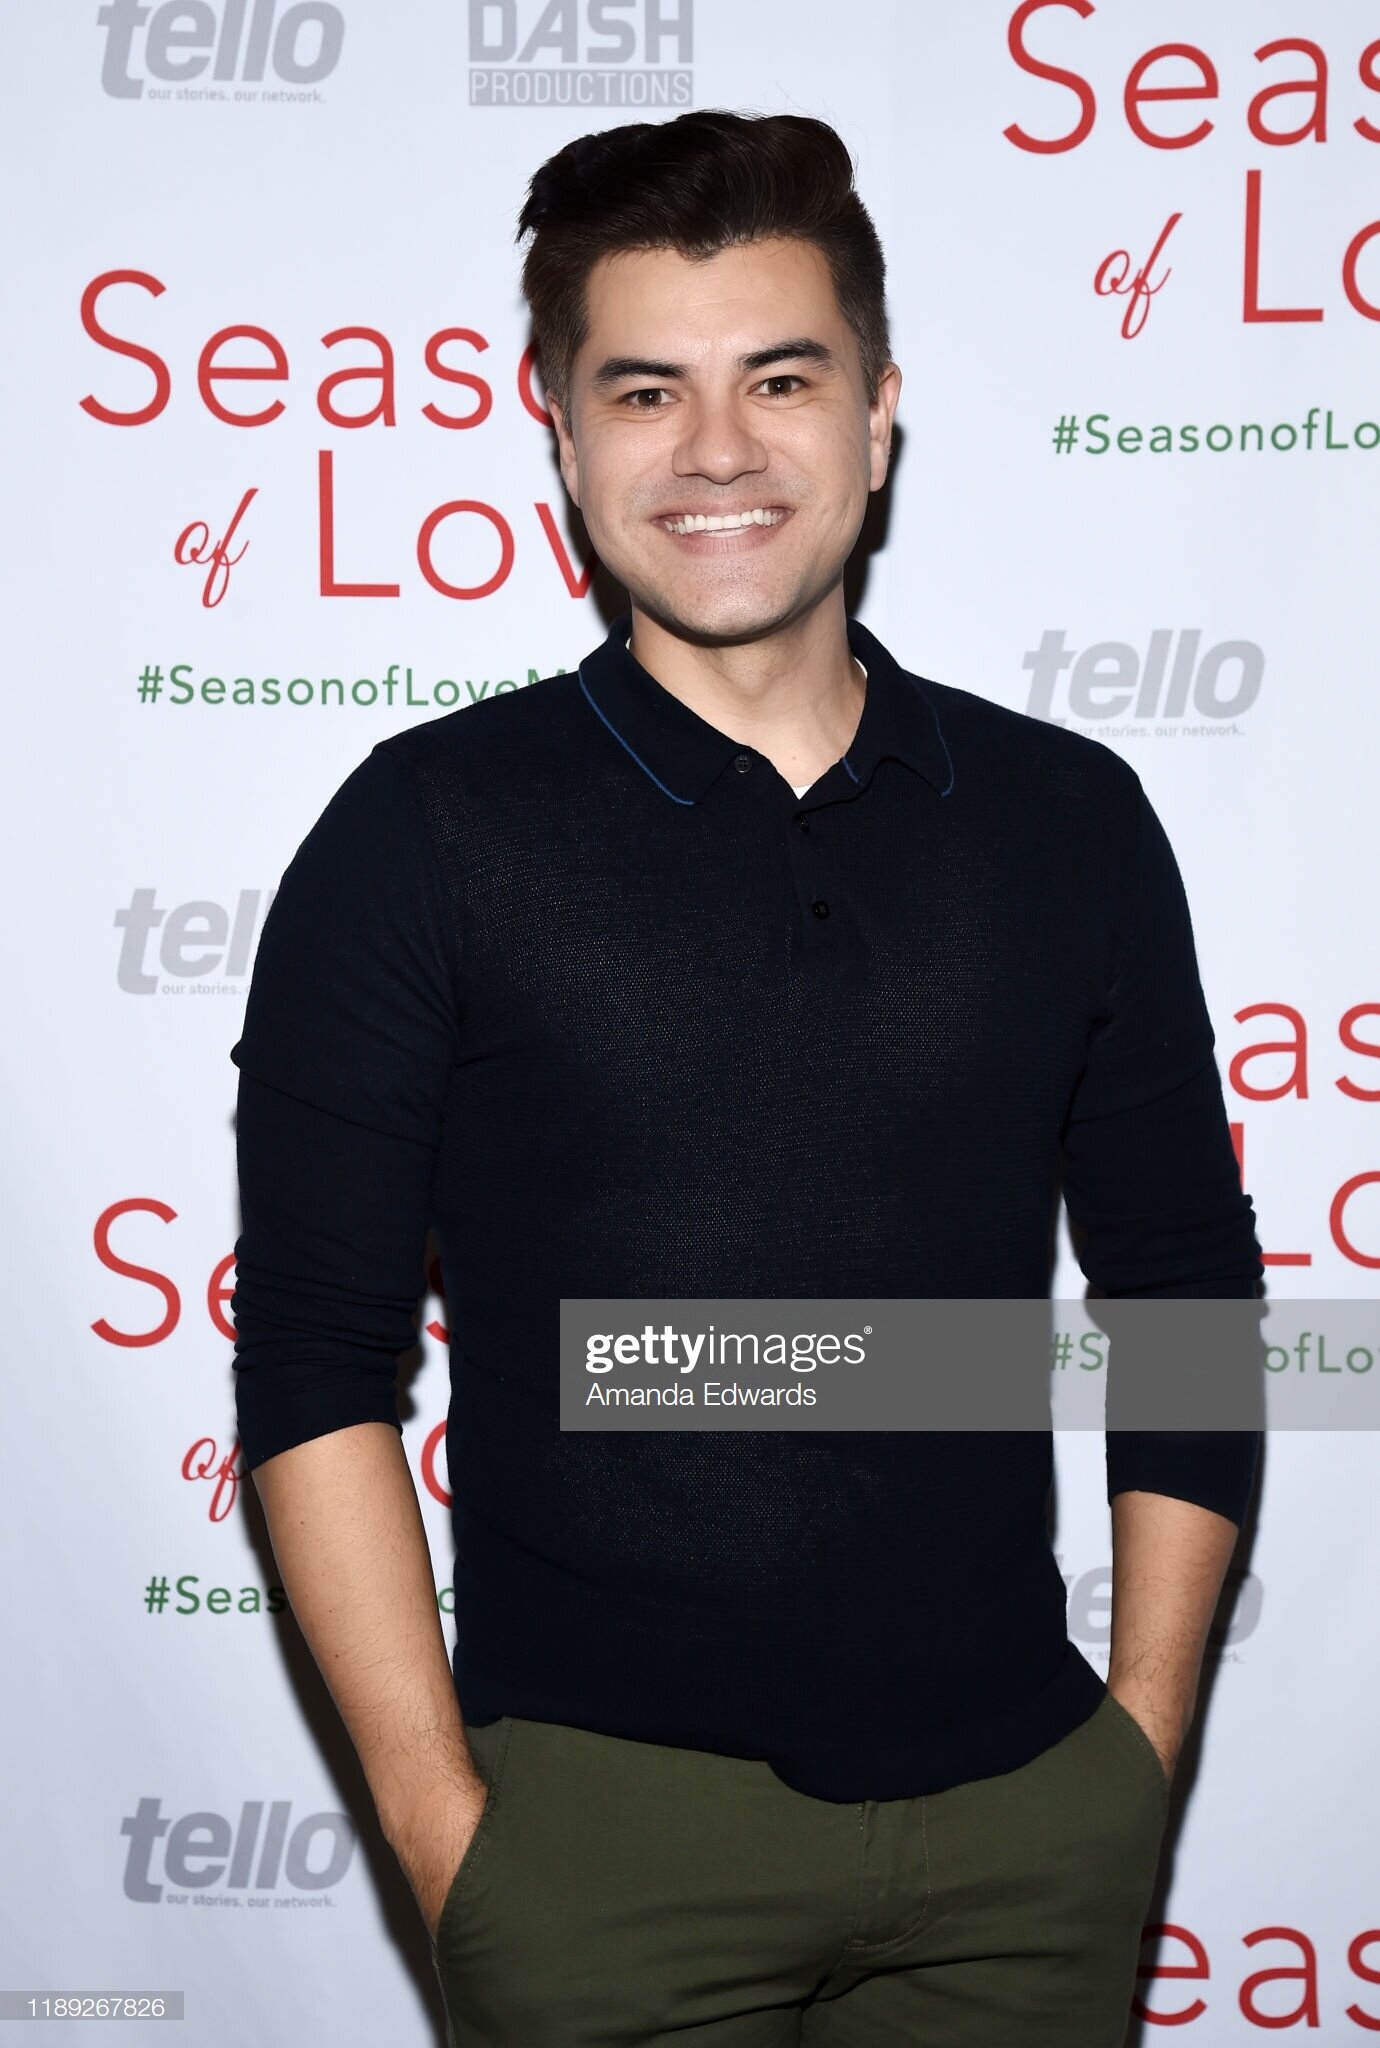  Actor Matthew Bridges arrives at the premiere of "Season Of Love" at the Landmark Theater on November 21, 2019 in Los Angeles, California. (Photo by Amanda Edwards/Getty Images) 